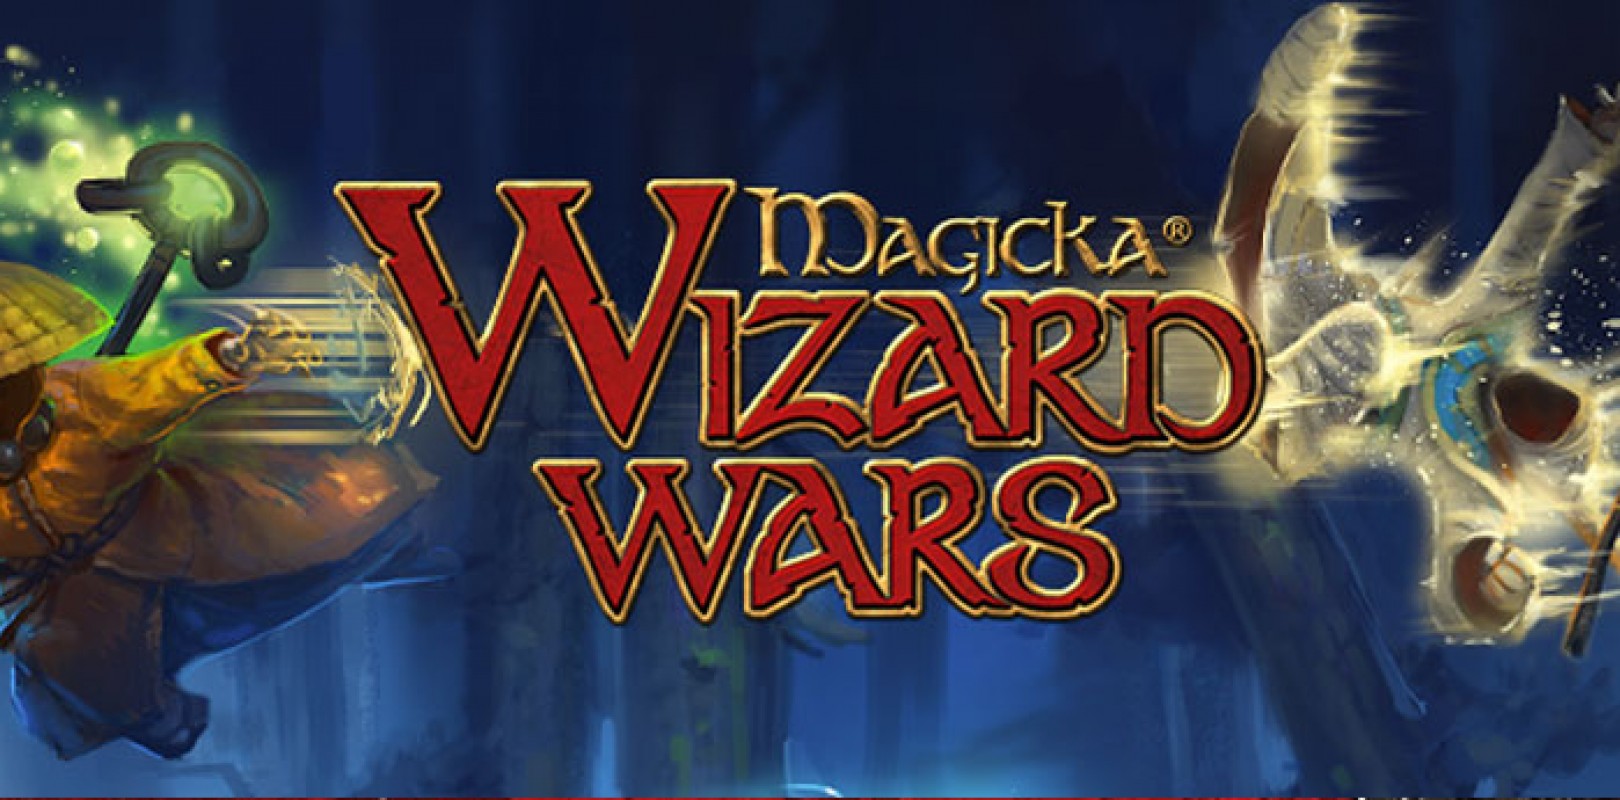 Magicka wizards of the square tablet steam фото 91